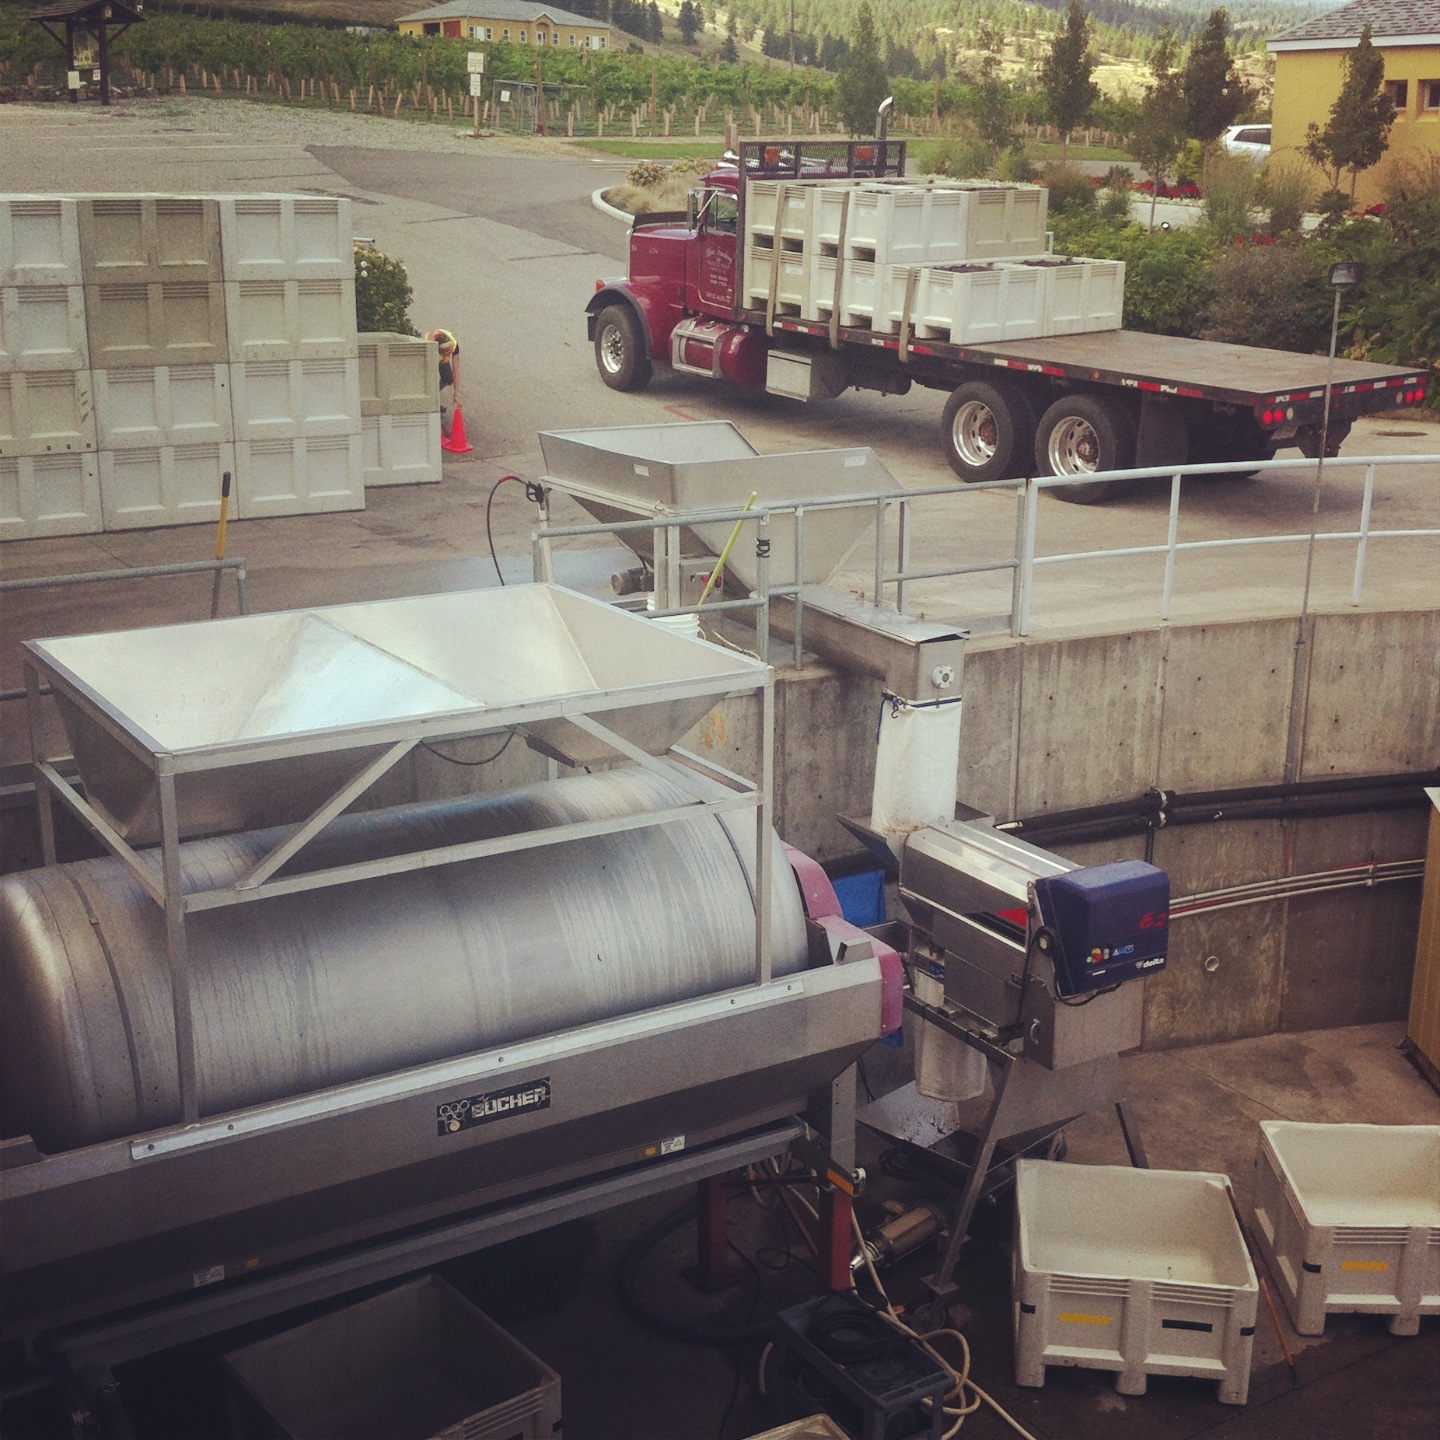 Last load of Pinot Gris for the day.